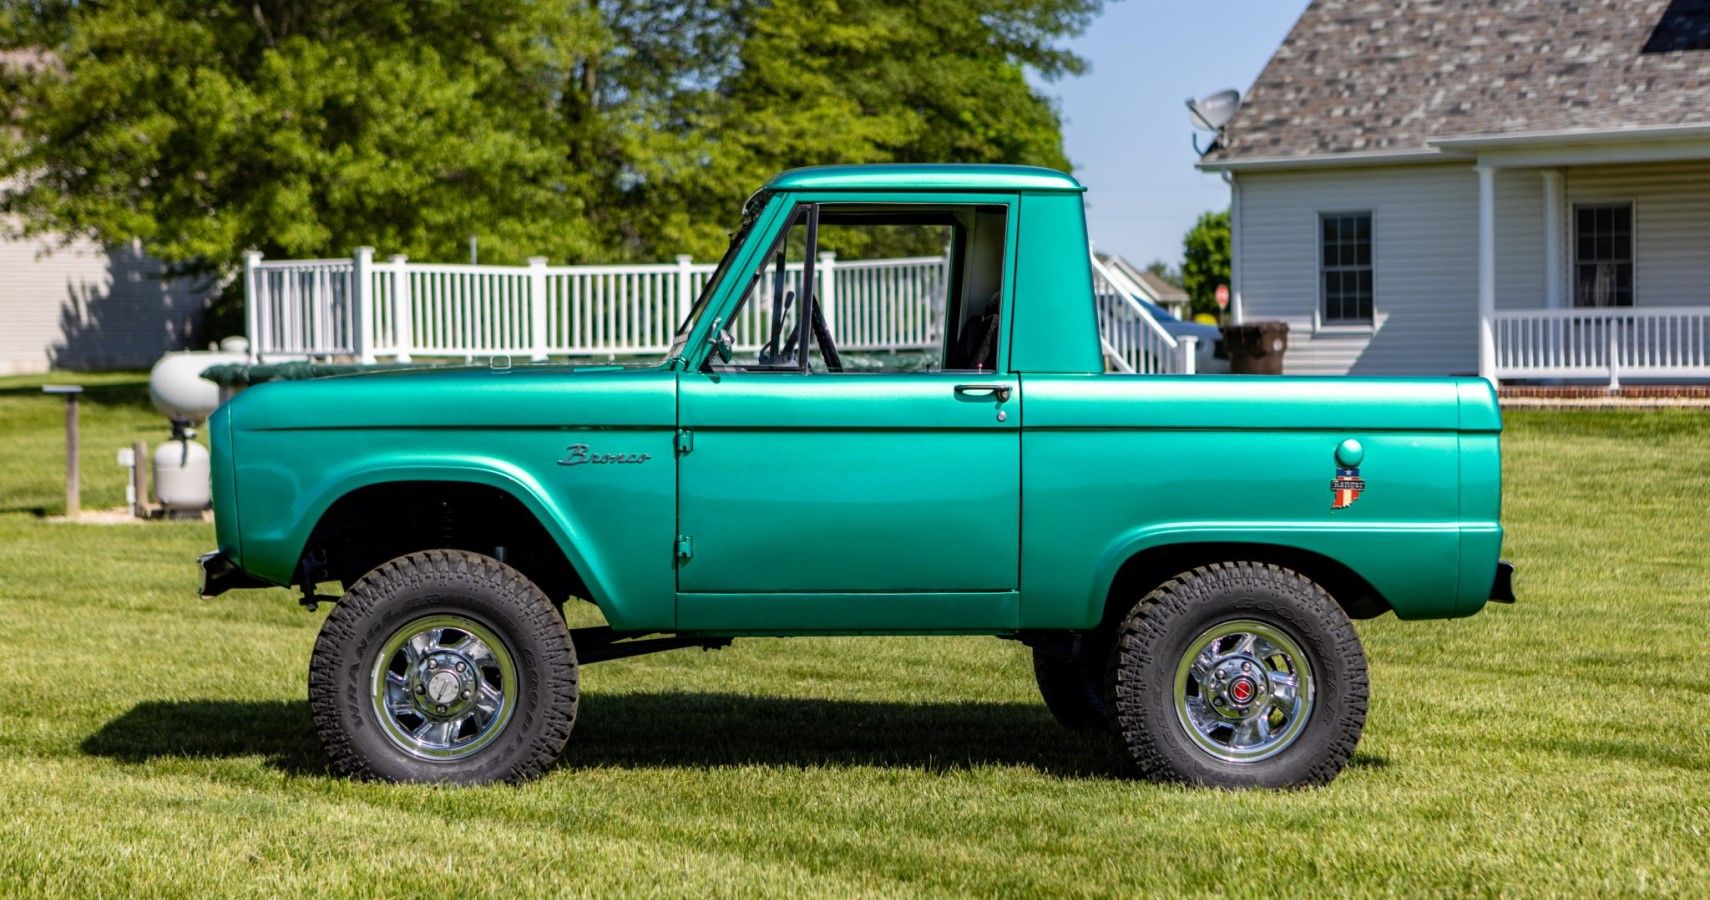 1966 Ford Bronco side view